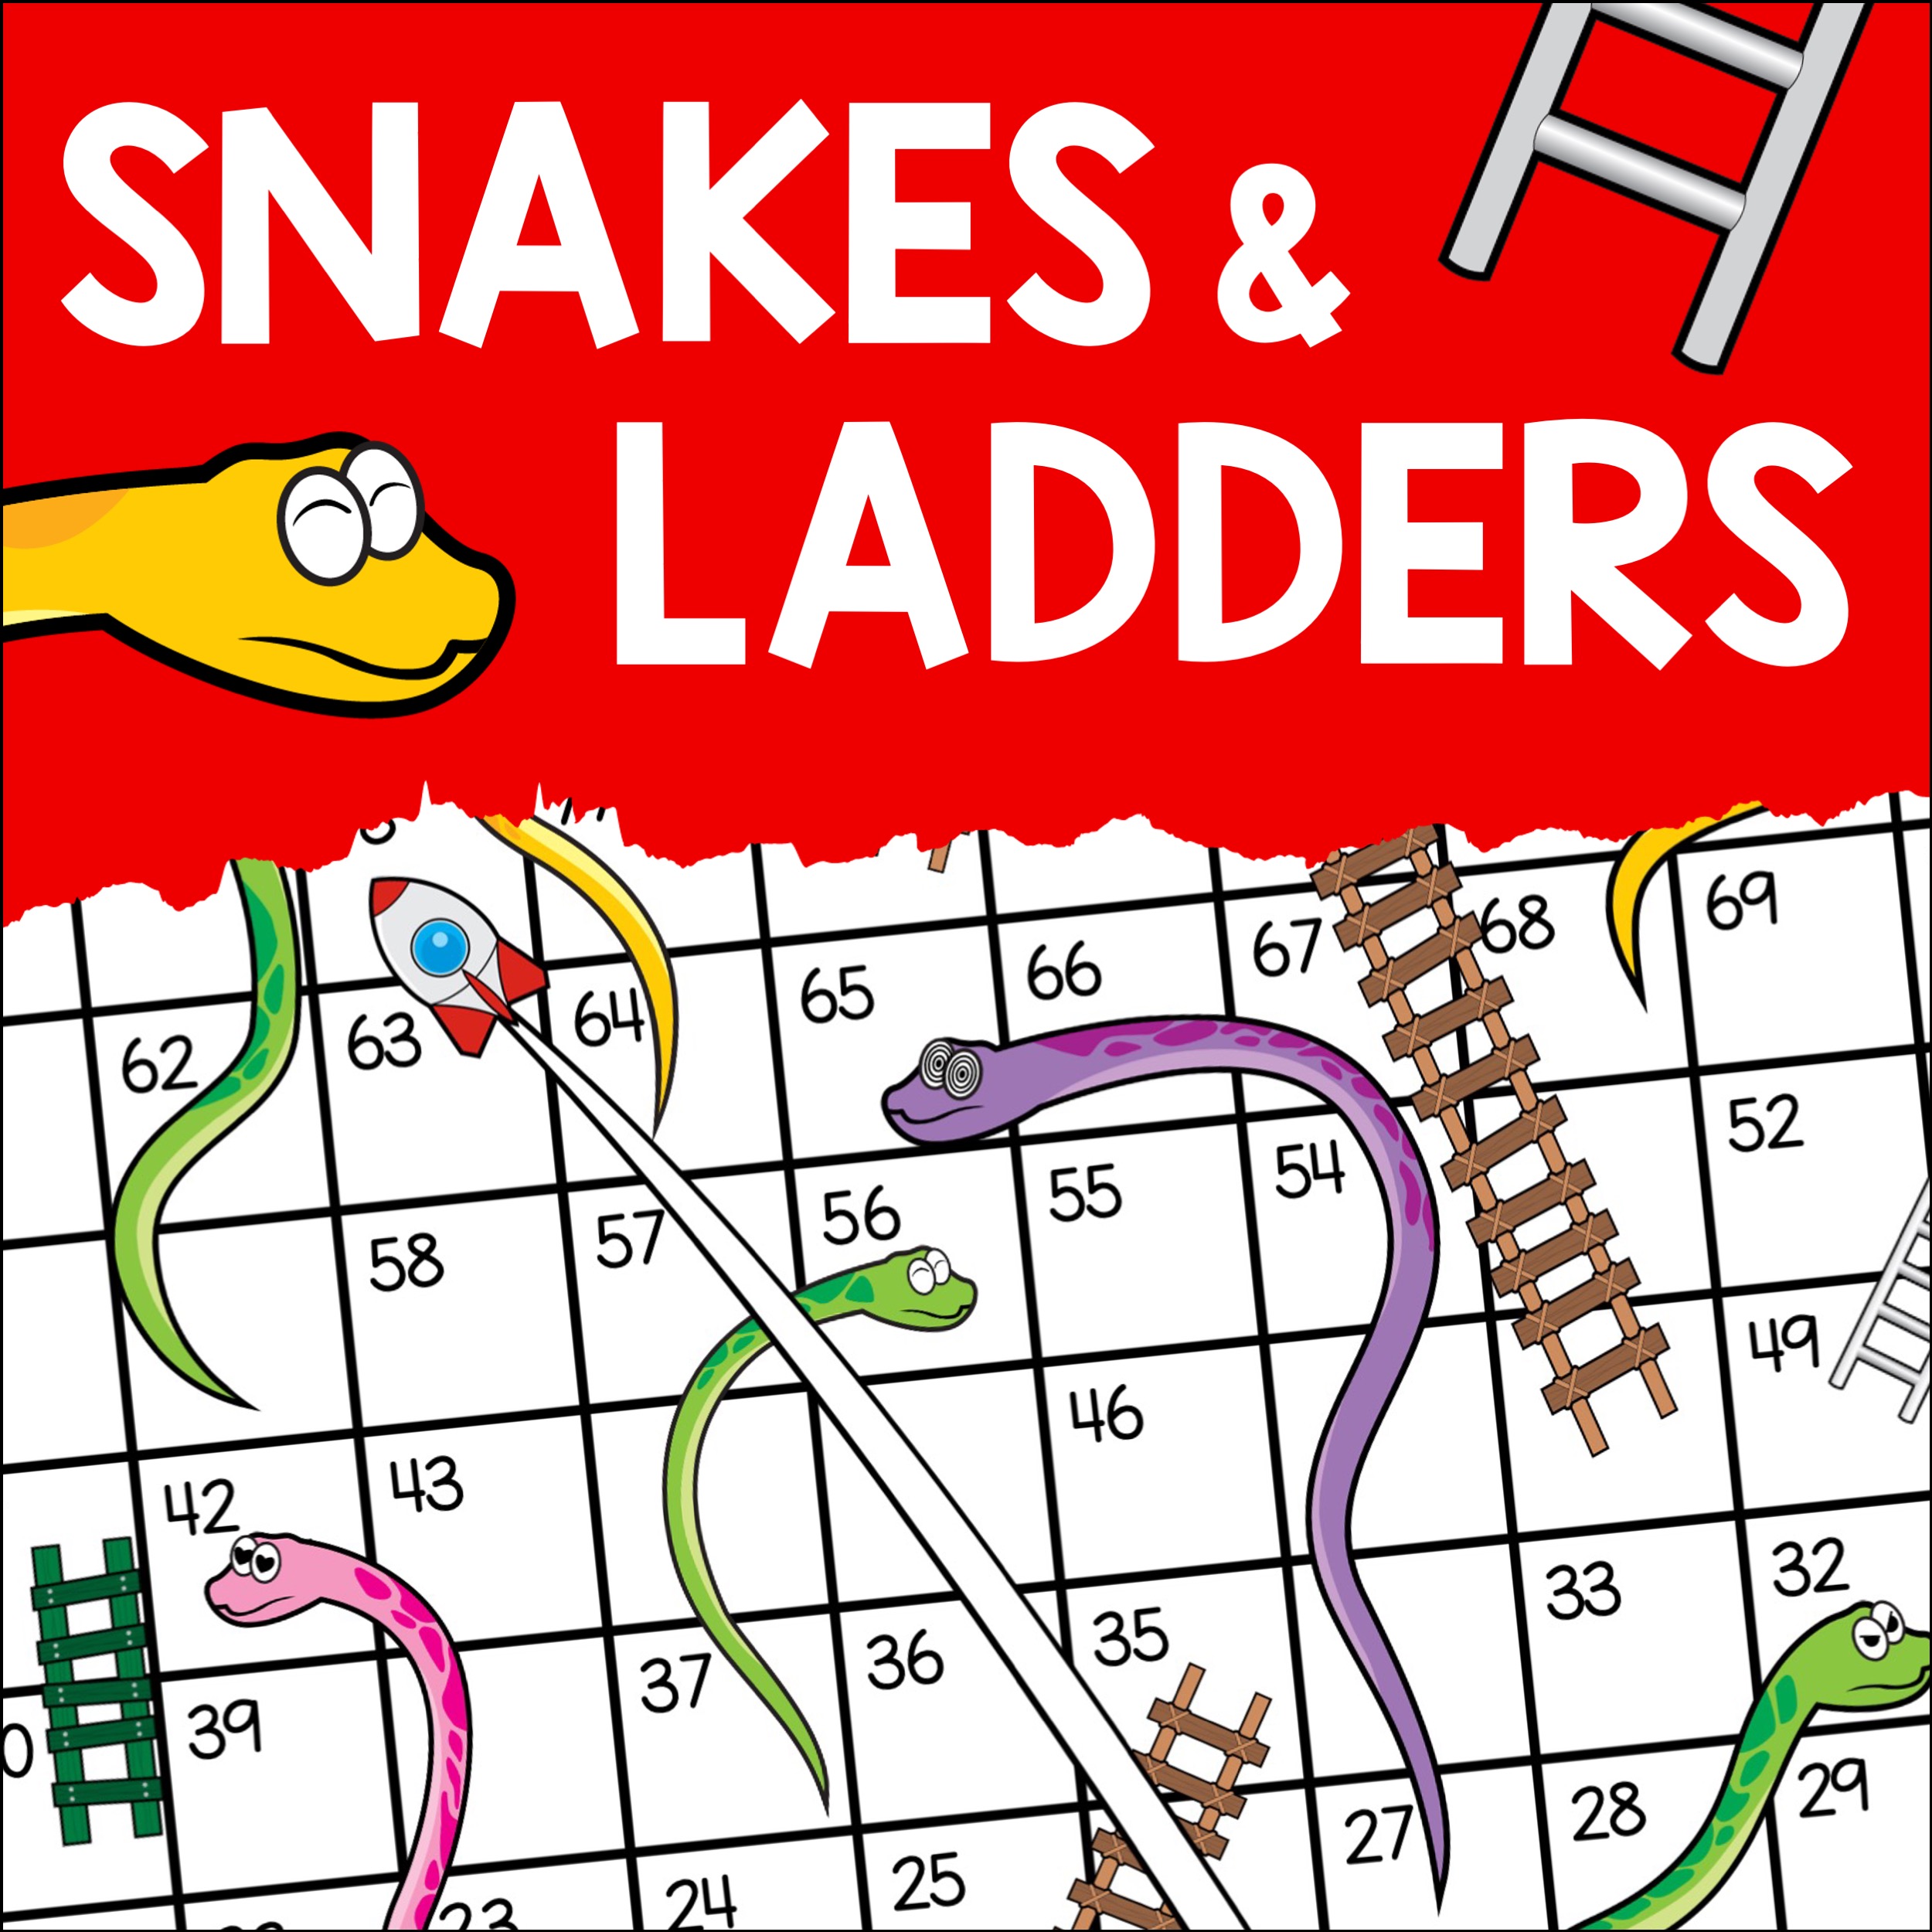 snakes-and-ladders-board-game-fun-printable-classroom-game